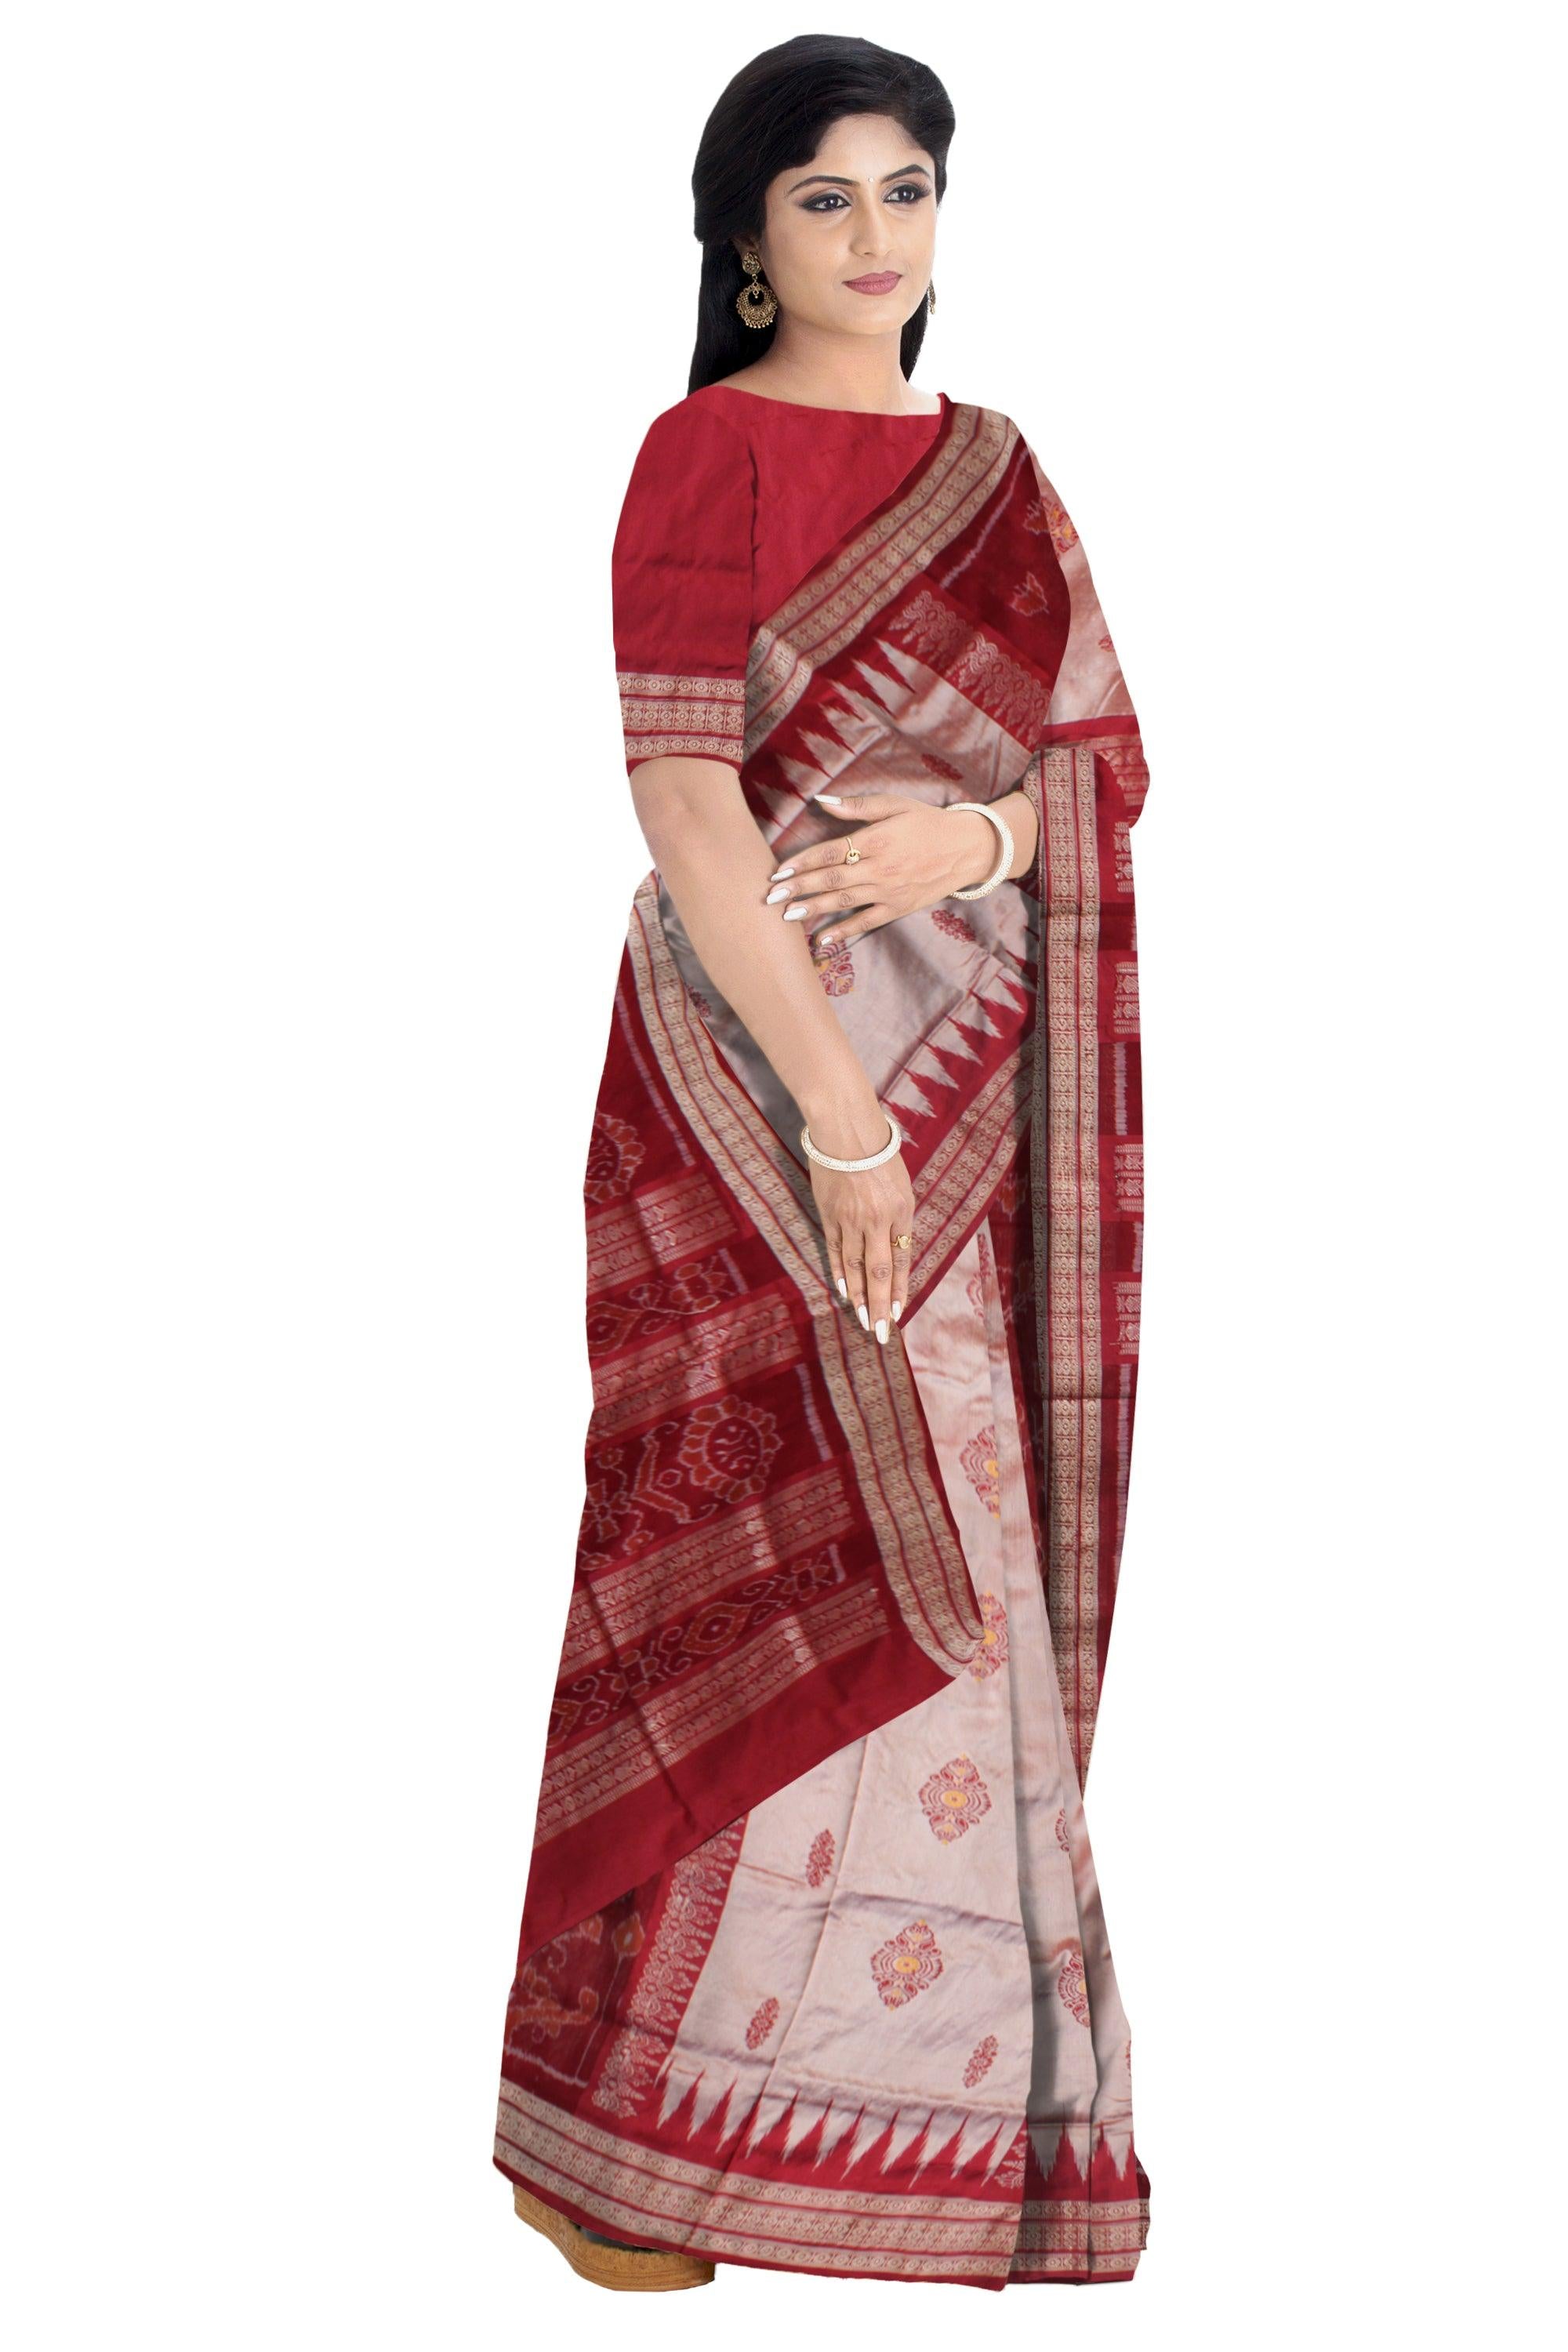 PEACOCK PRINT BOMKEI PATTERN PATA SAREE IS SILVER AND MAROON COLOR BASE,COMES WITH MATCHING BLOUSE PIECE. - Koshali Arts & Crafts Enterprise